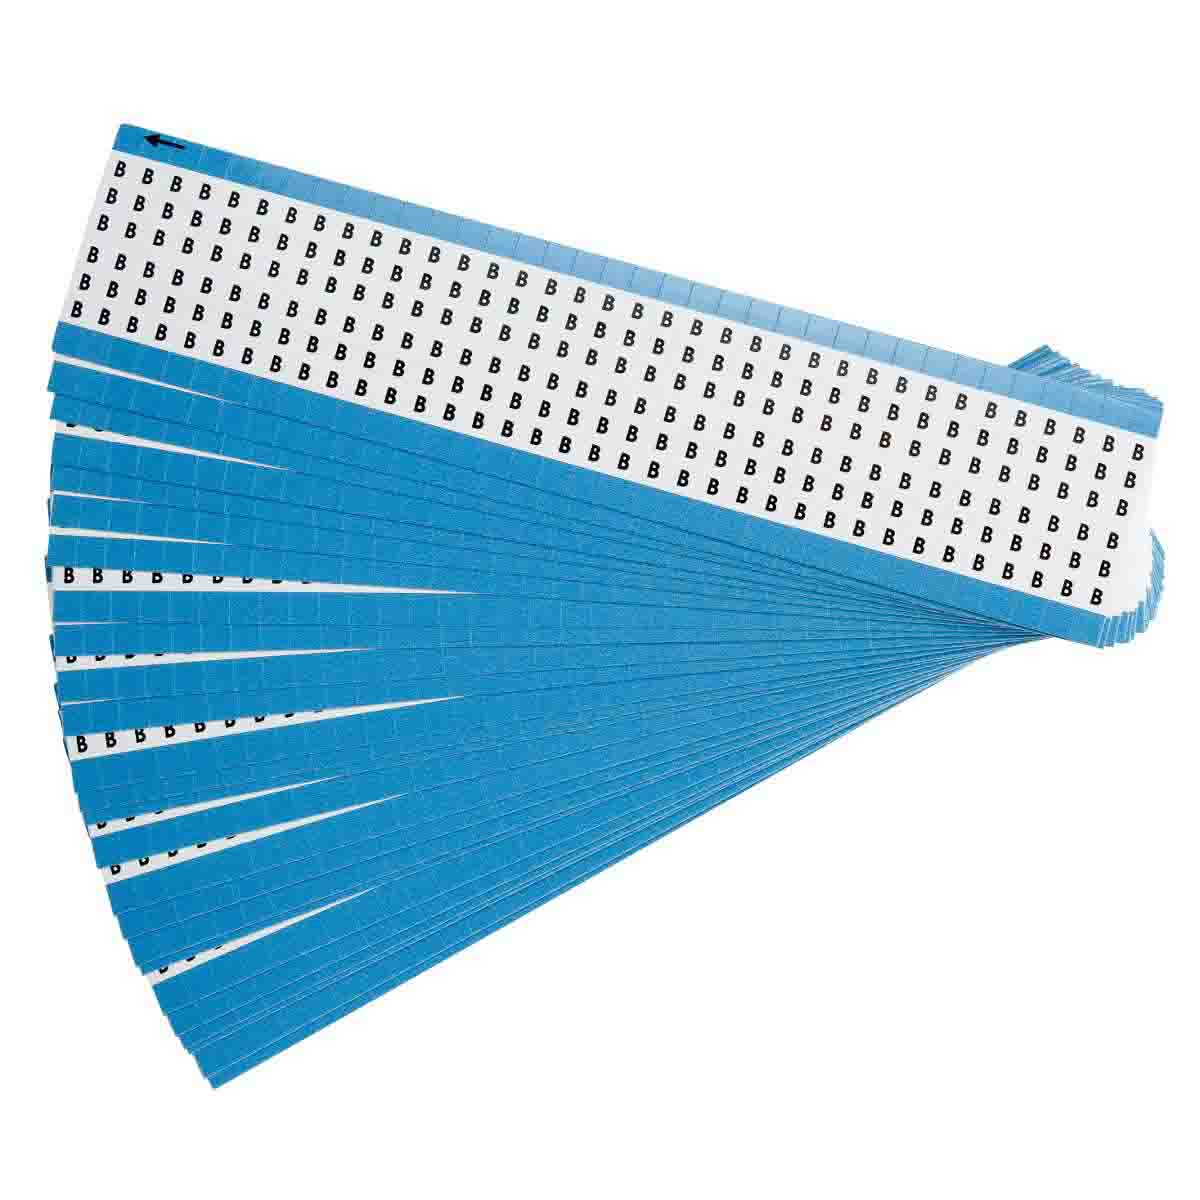 Black on White 25 Cards B-500 Brady WM-1075-1099-PK Repositionable Vinyl Cloth Consecutive Numbers Wire Marker Card